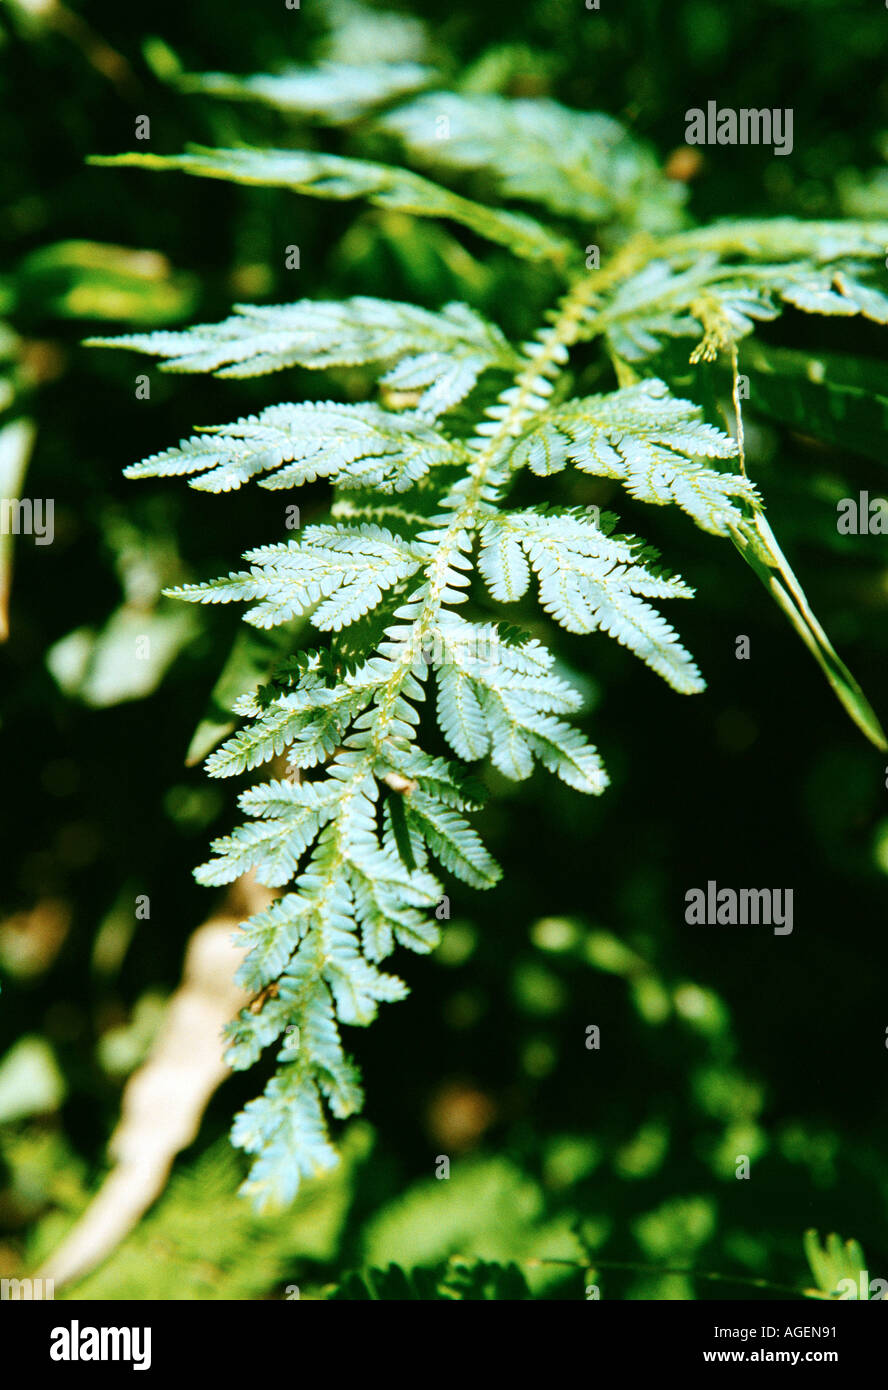 Blueish fern in Taman Negara national park in Malaysia one of the oldest rainforests in the world Stock Photo